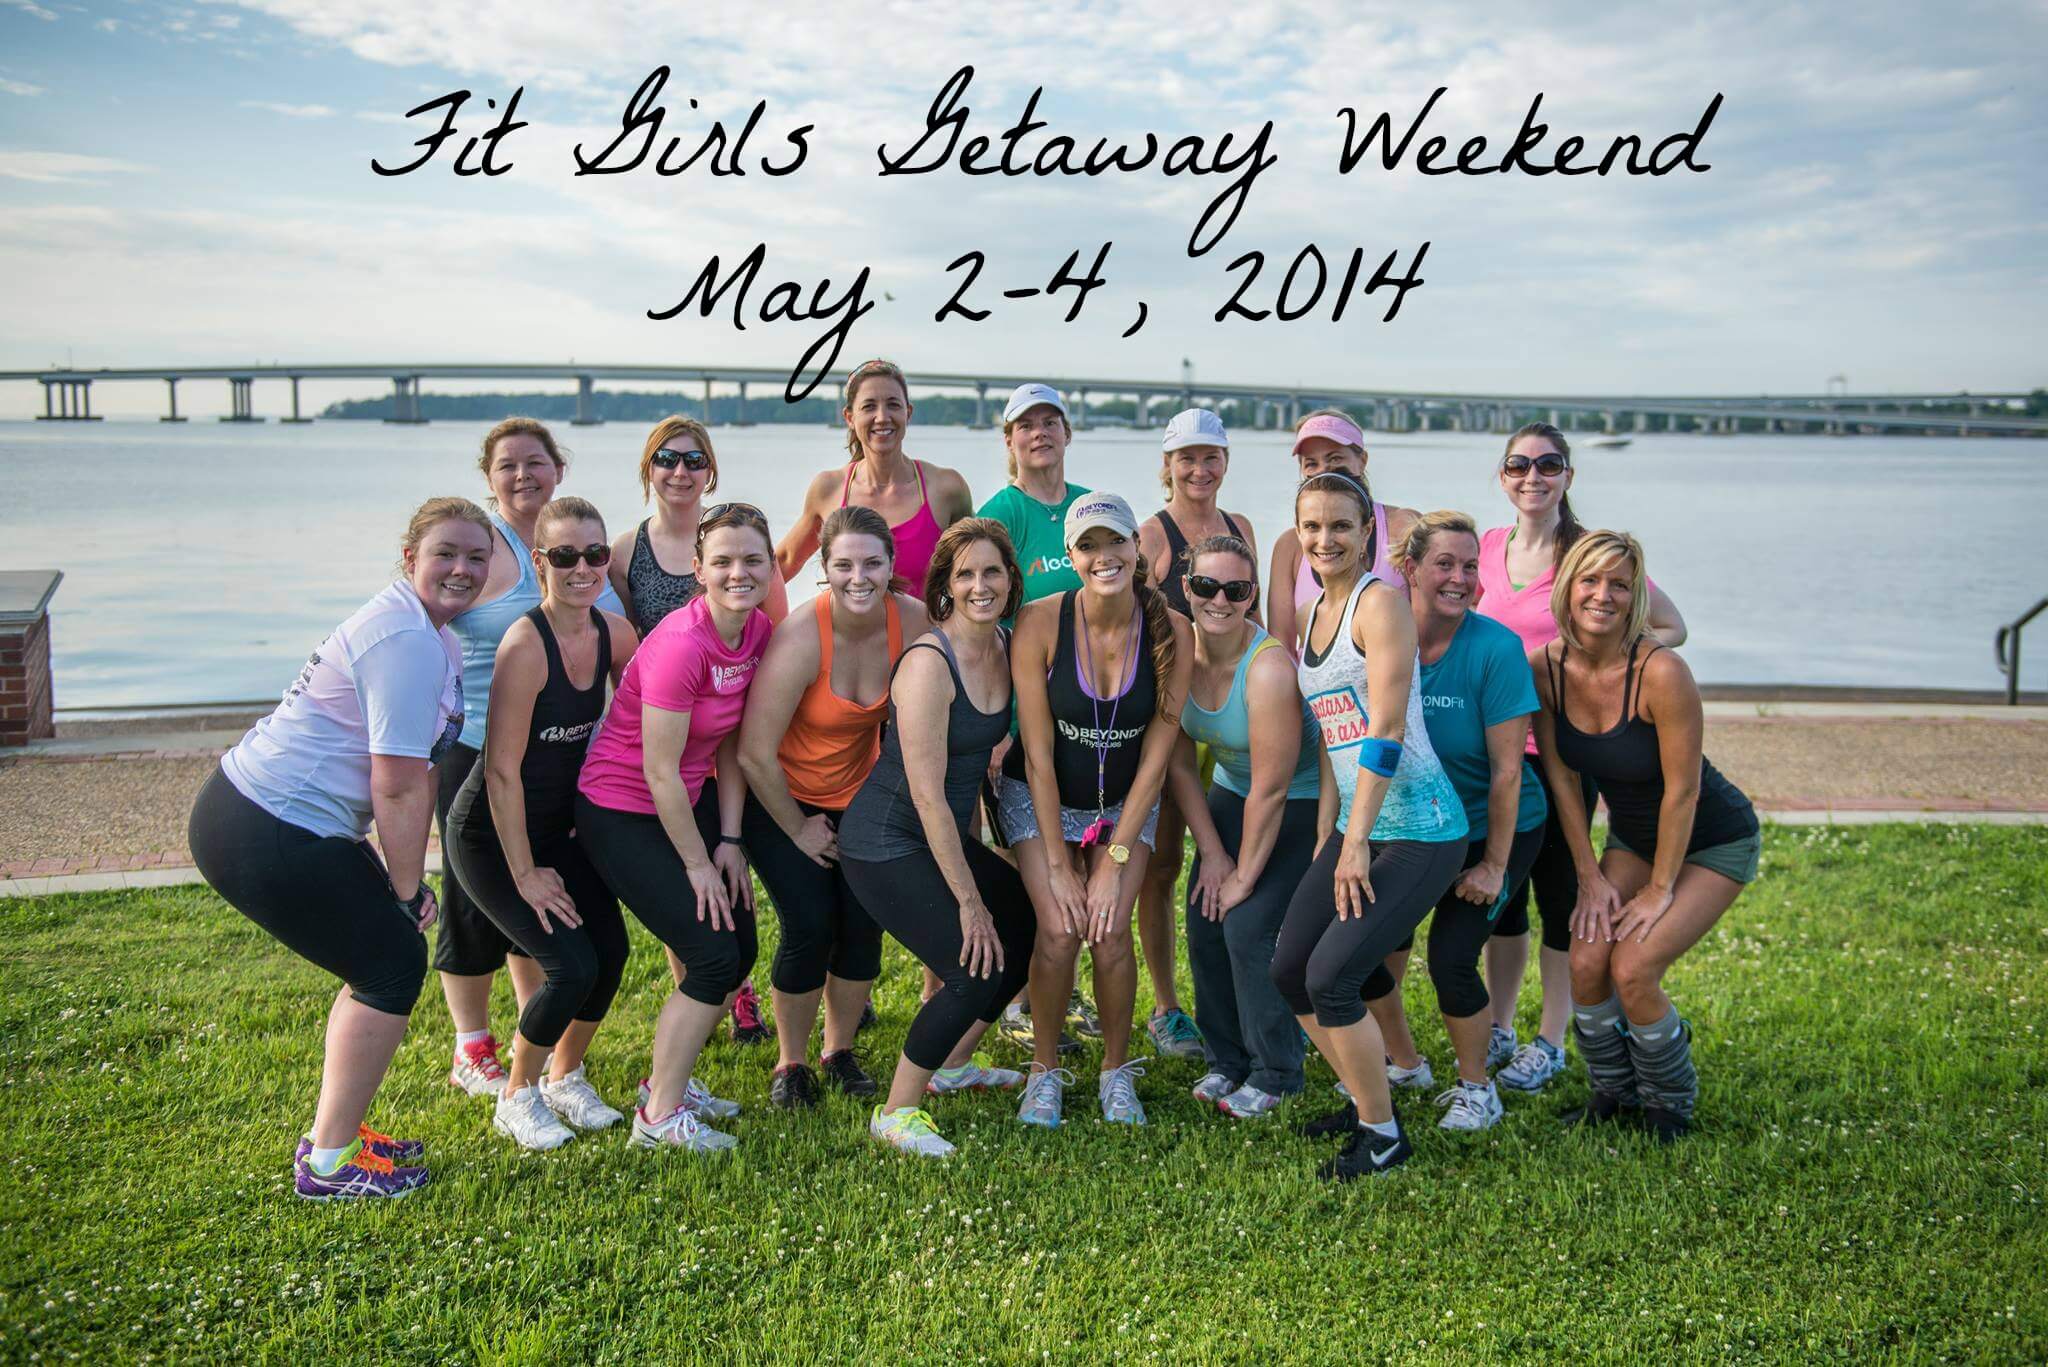 Fit-Girls-Getaway-Weekend with Title